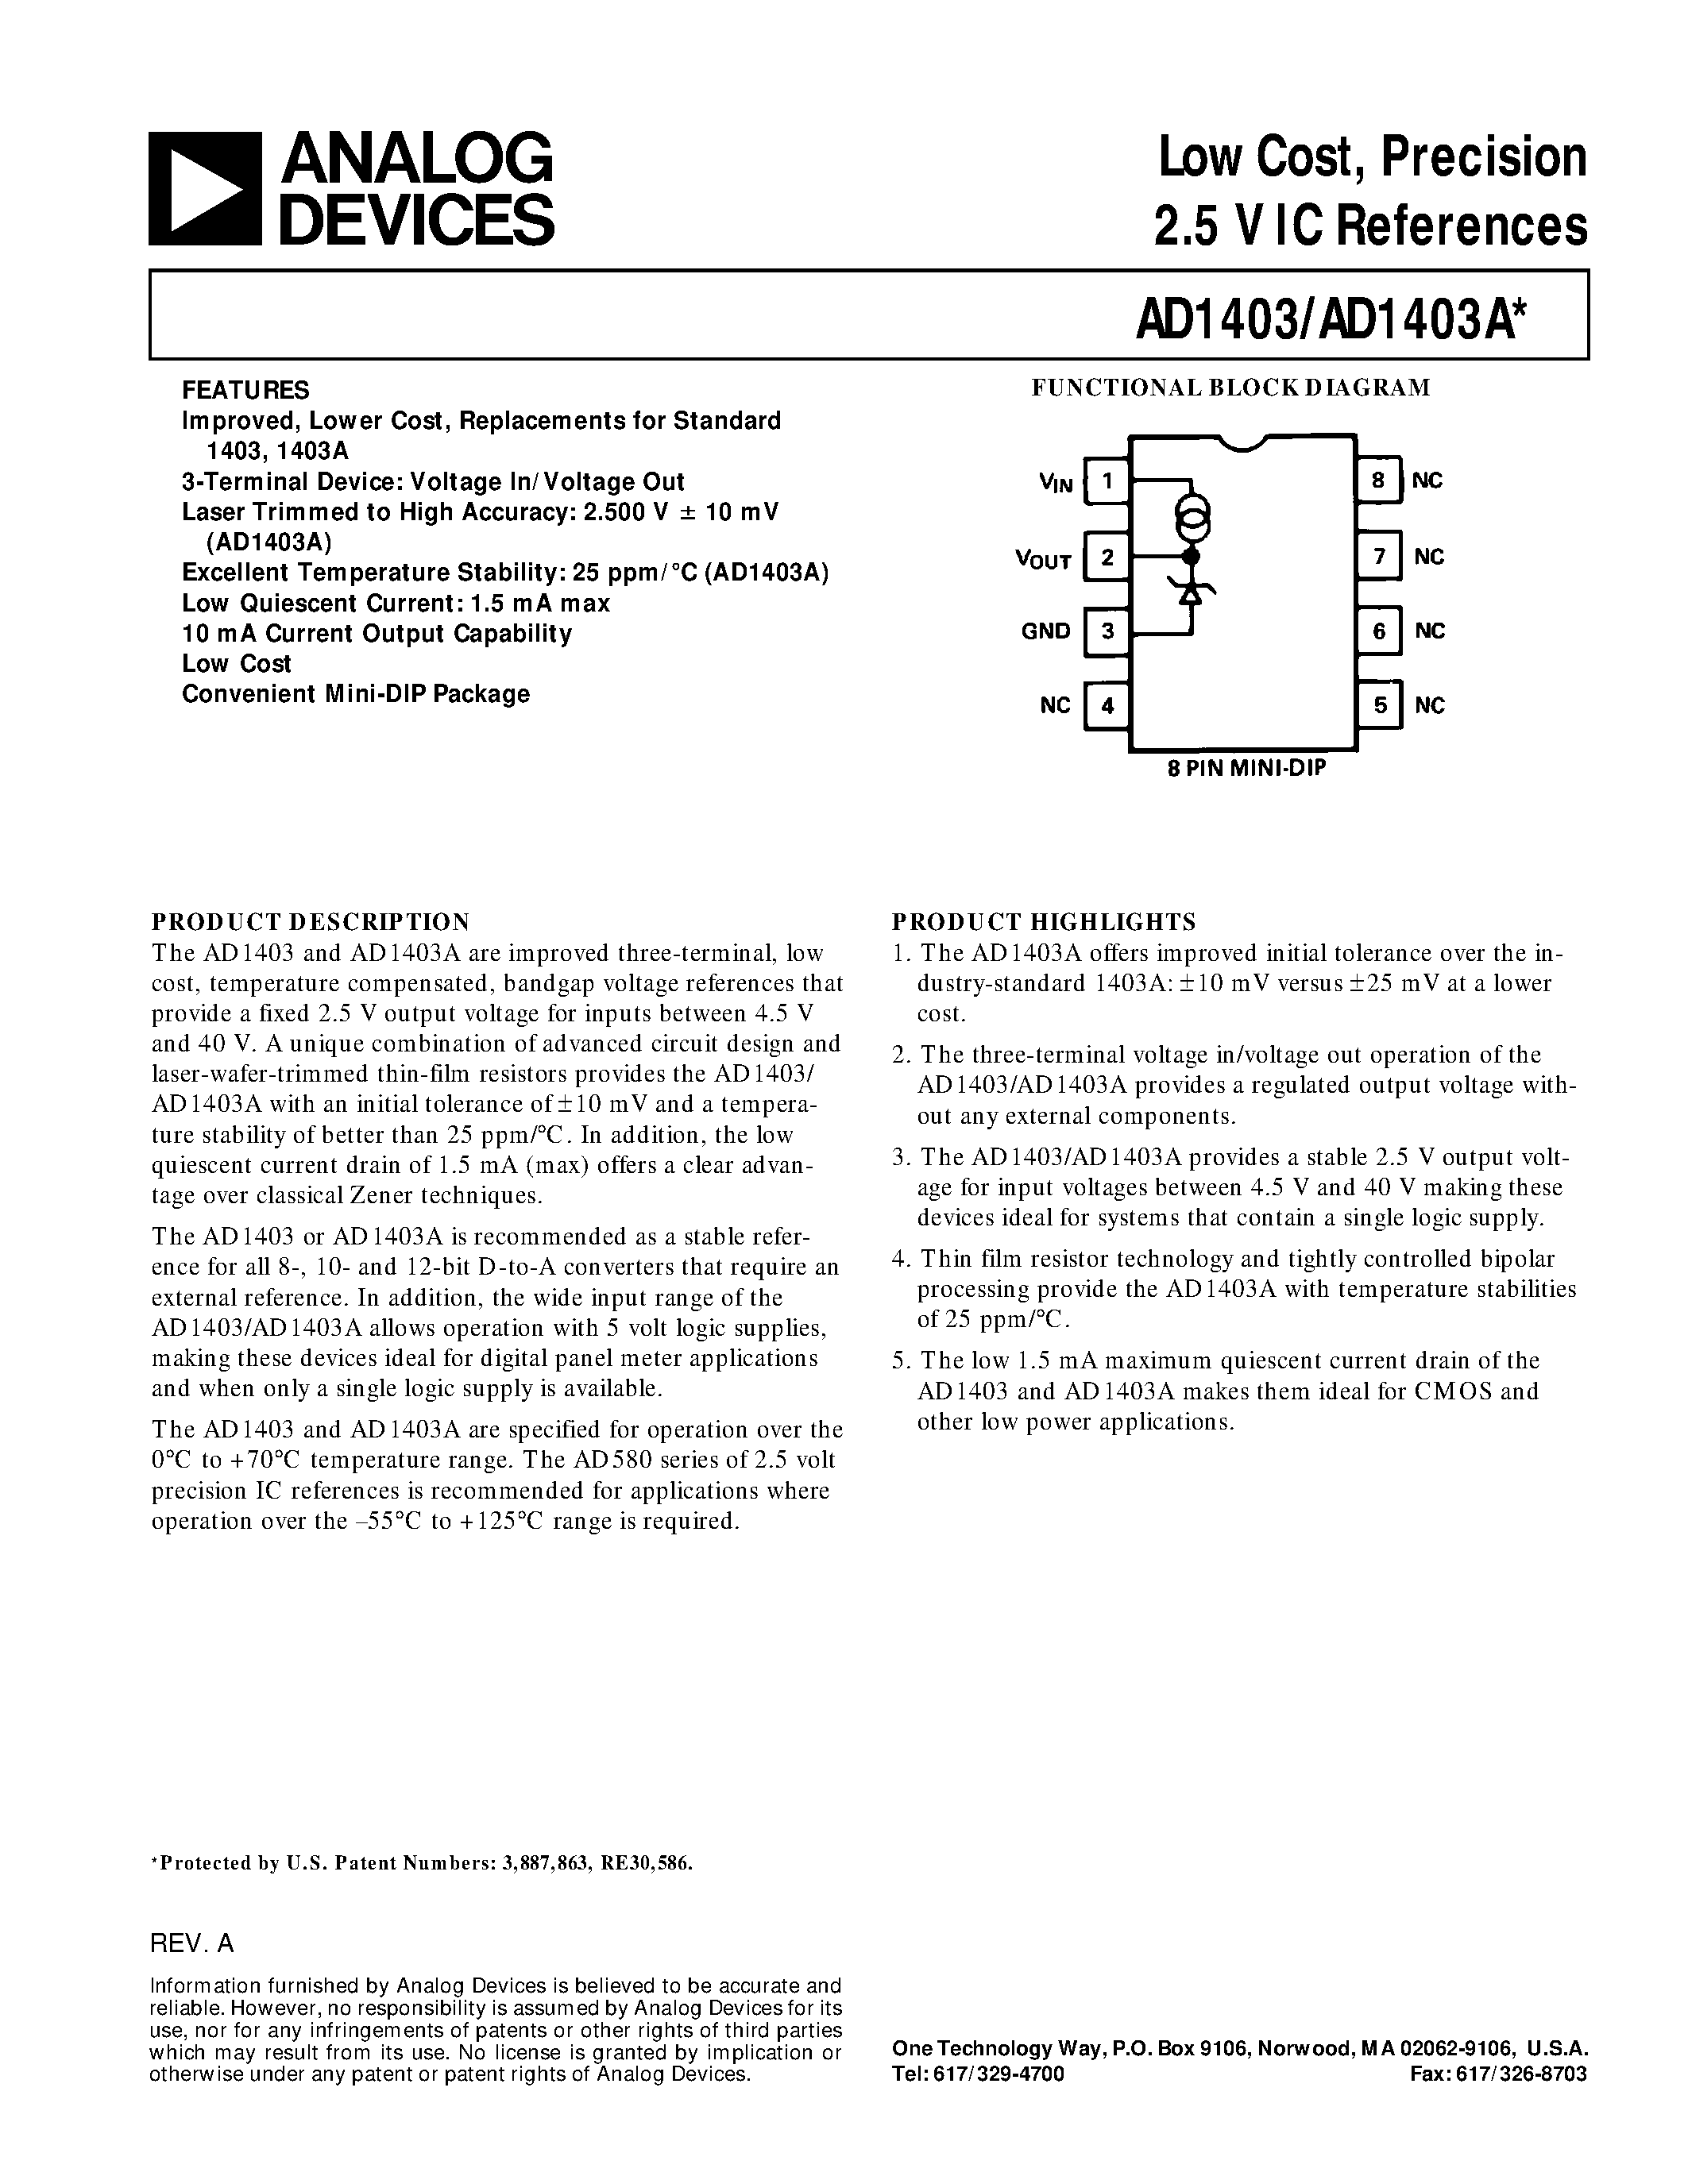 Datasheet AD1403 - Low Cost/ Precision 2.5 V IC References page 1